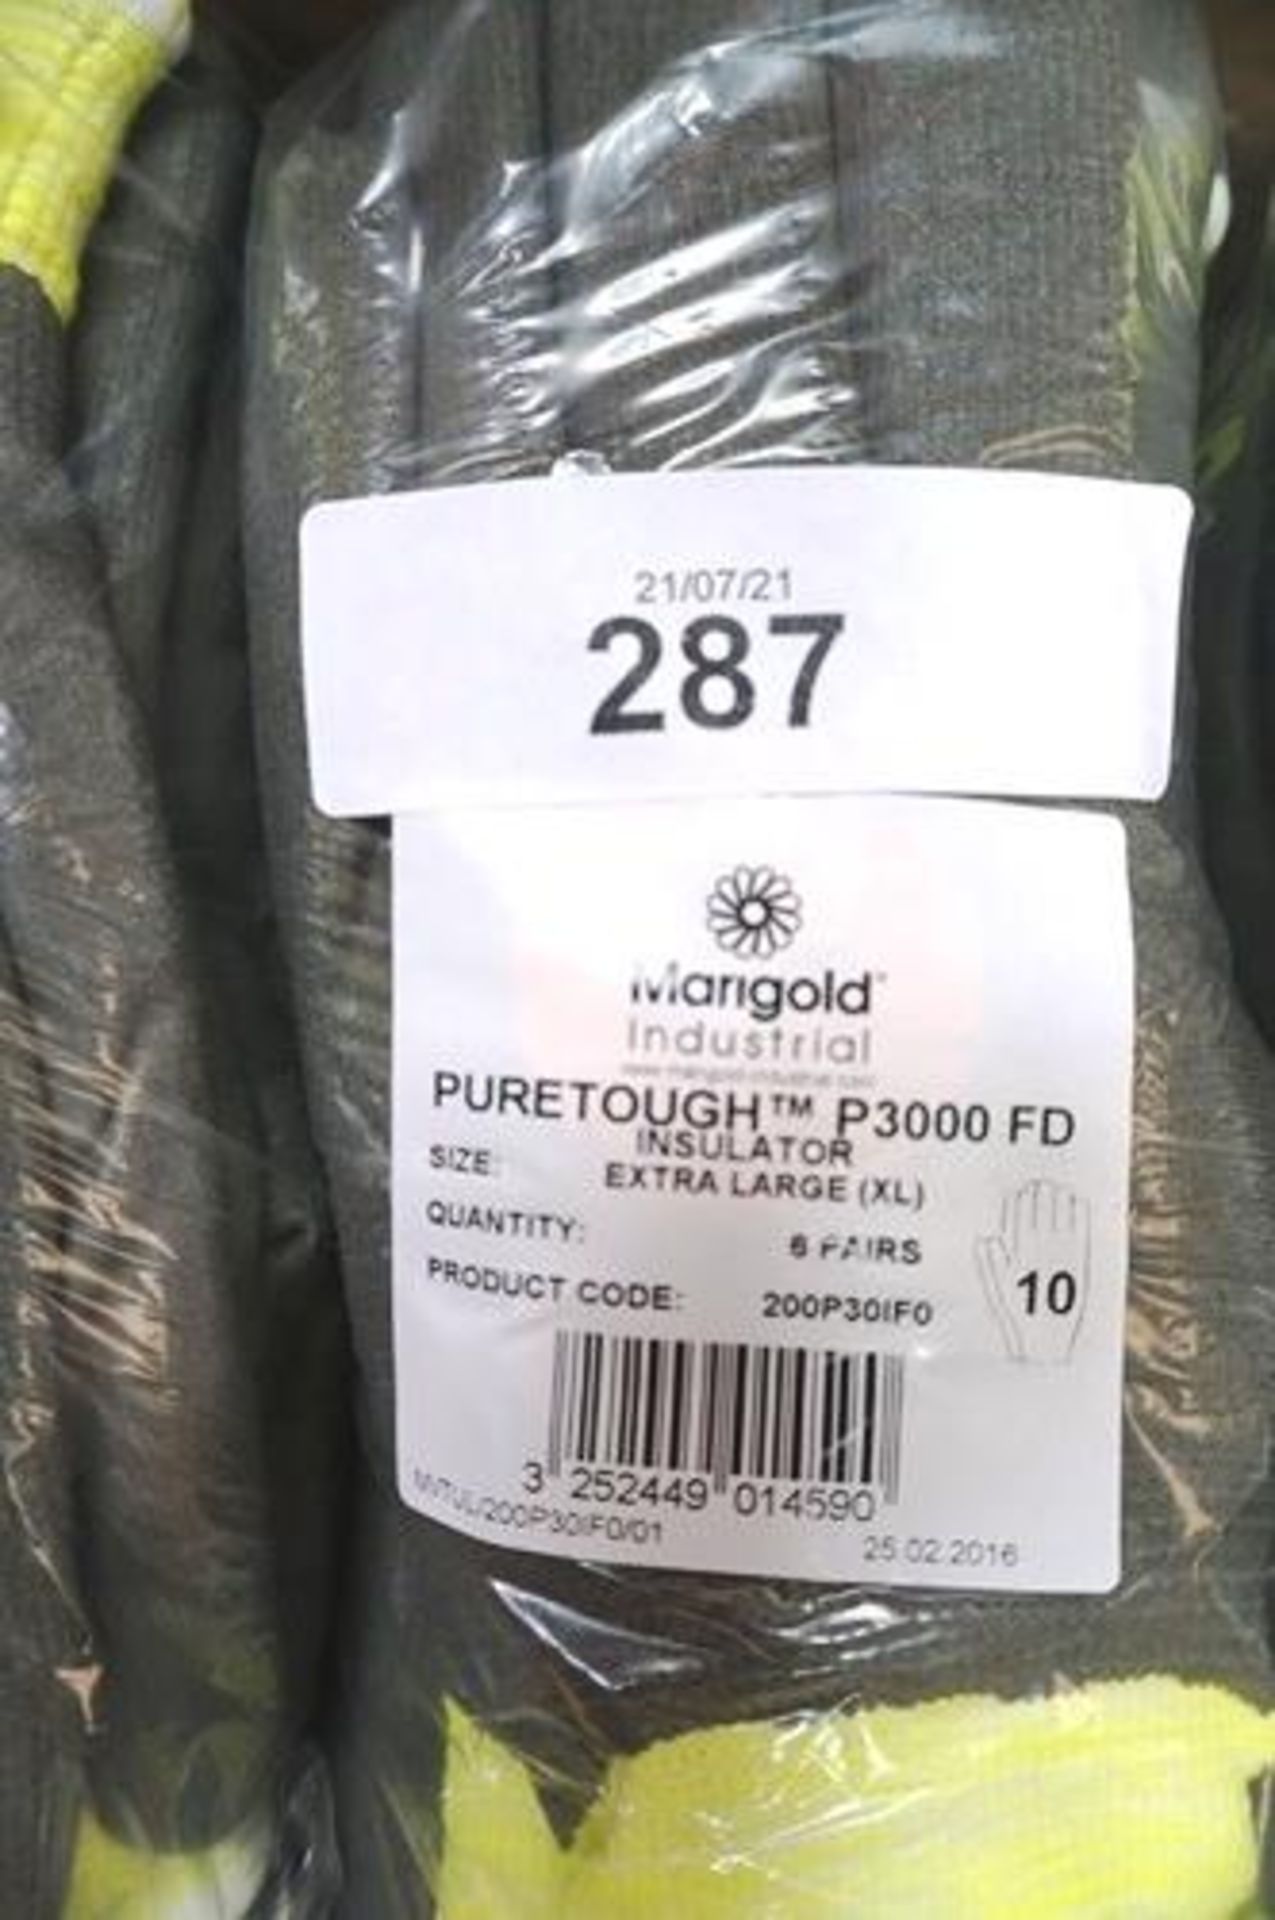 72 x pairs of Marigold industrial pure tough P3000 XL insulator gloves, size 10 - Sealed new in pack - Image 2 of 2